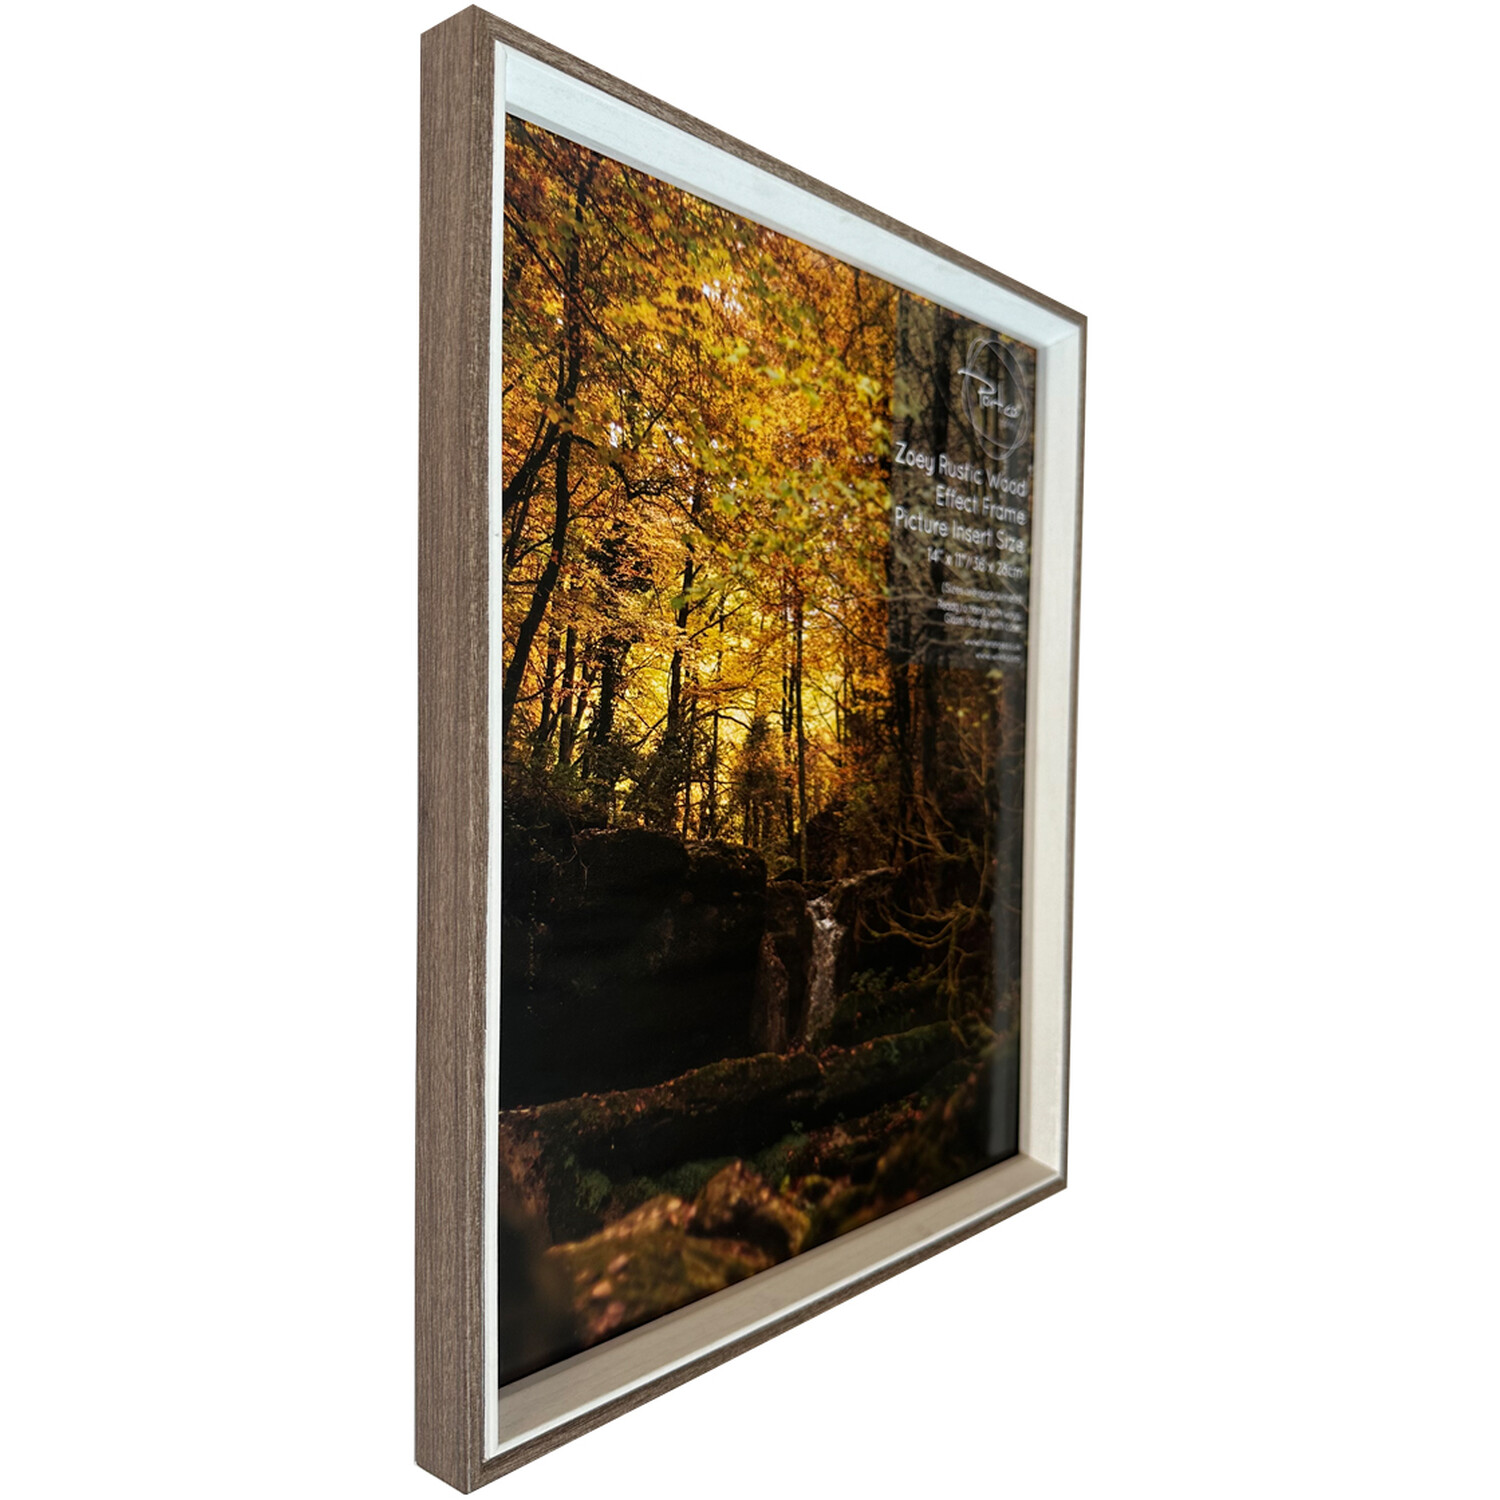 Zoey Rustic Wood Effect Frame - Brown / 14x11in Image 2